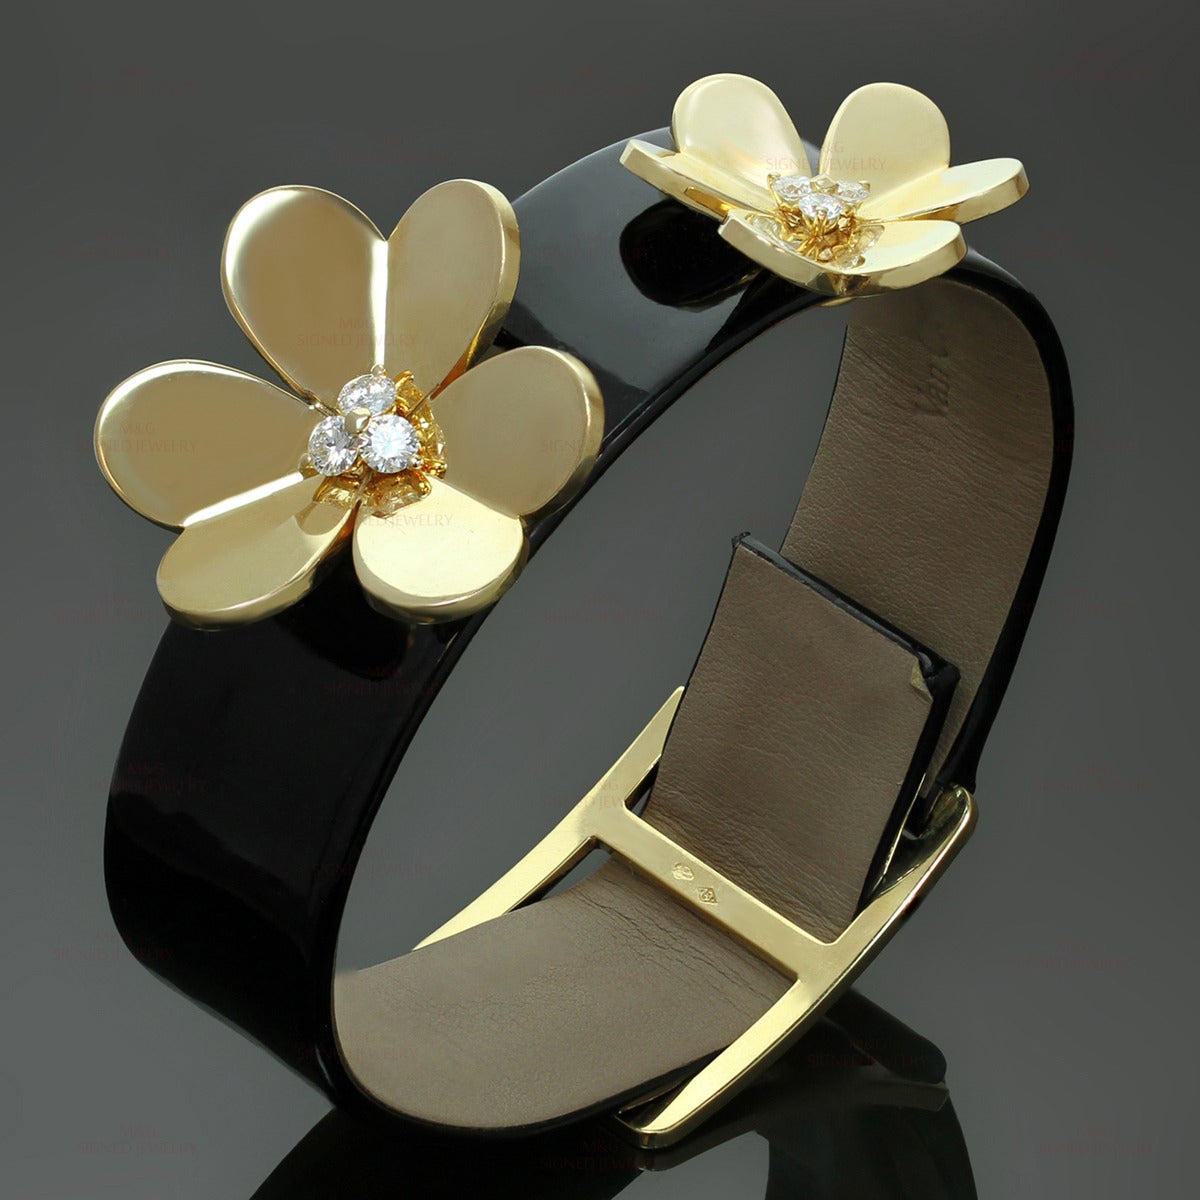 This fabulous Van Cleef & Arpels bracelet from the iconic Frivole collection is made in black patent leather and beautifully mounted with graduated 18k yellow gold flowers prong-set with X brilliant-cut round E-F VVS1-VVS2 diamonds of an estimated